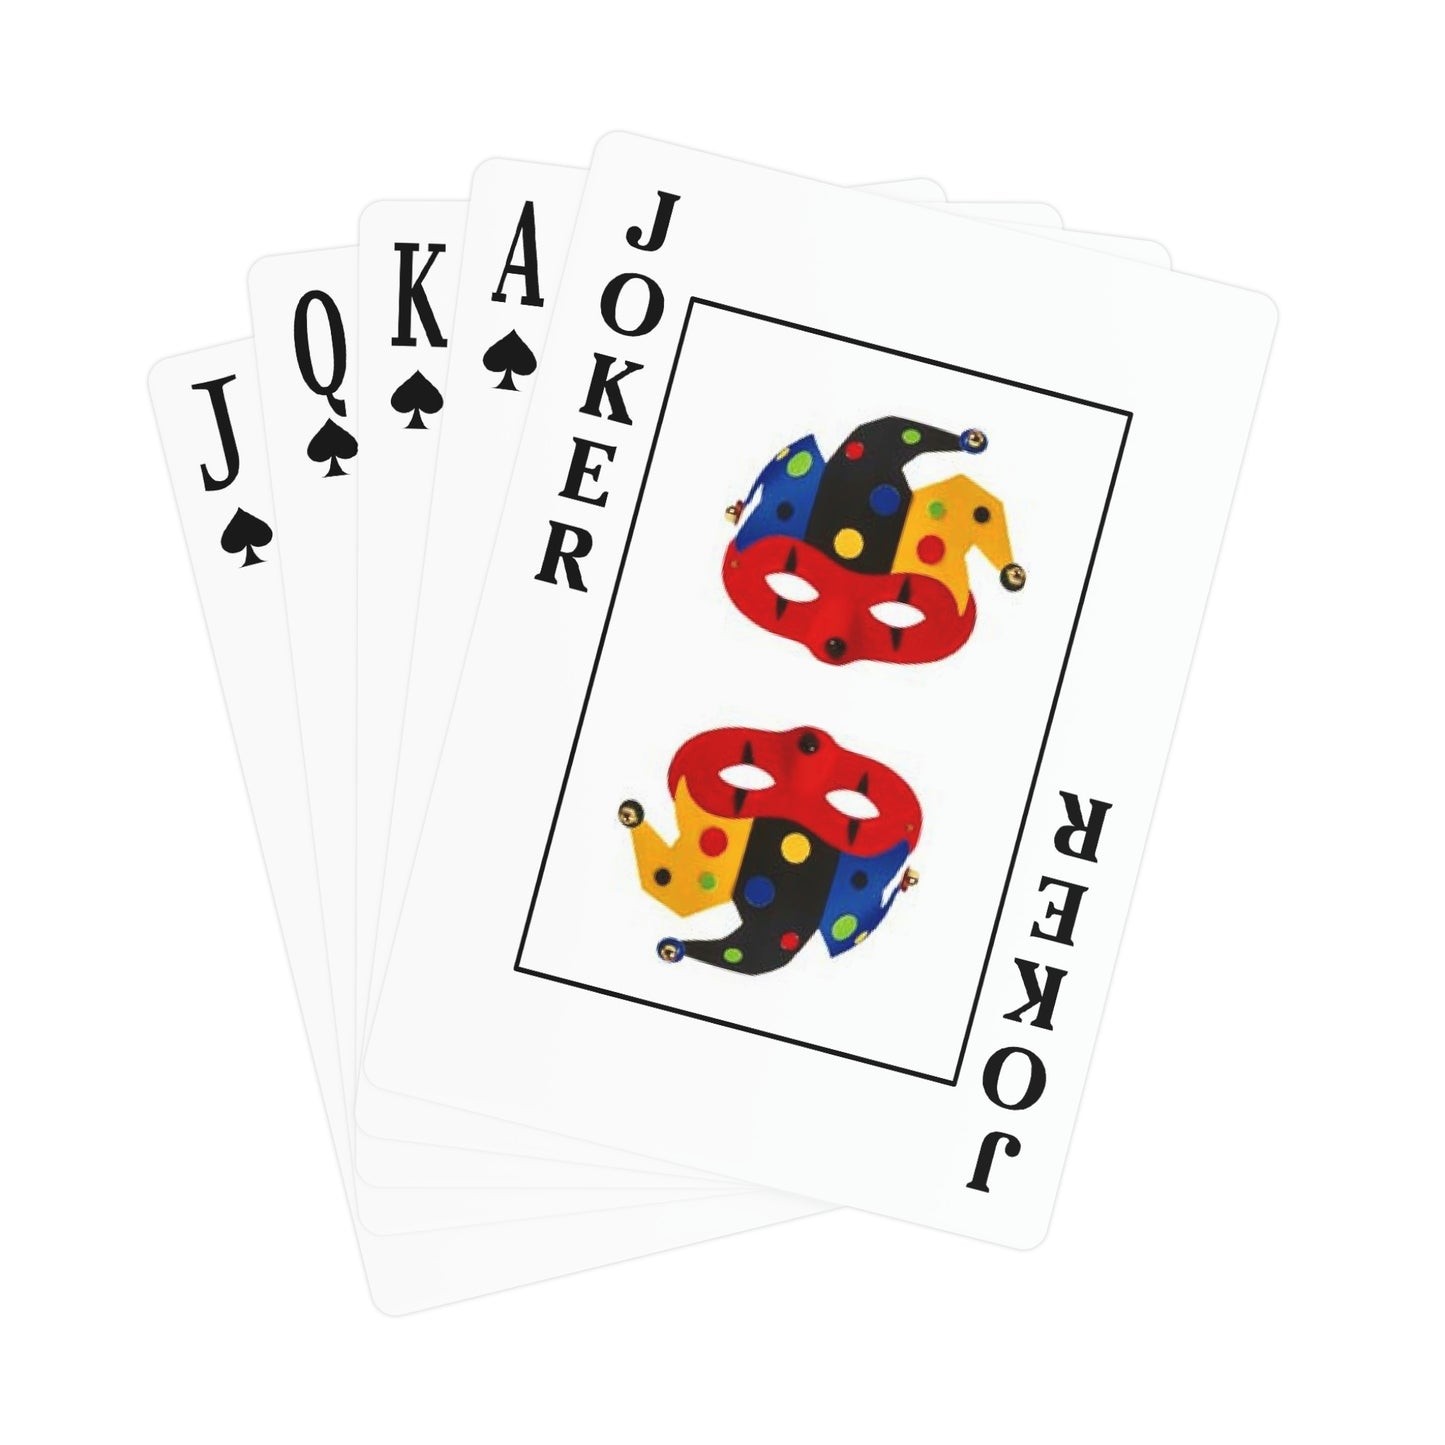 The Circus Affair - Playing Cards